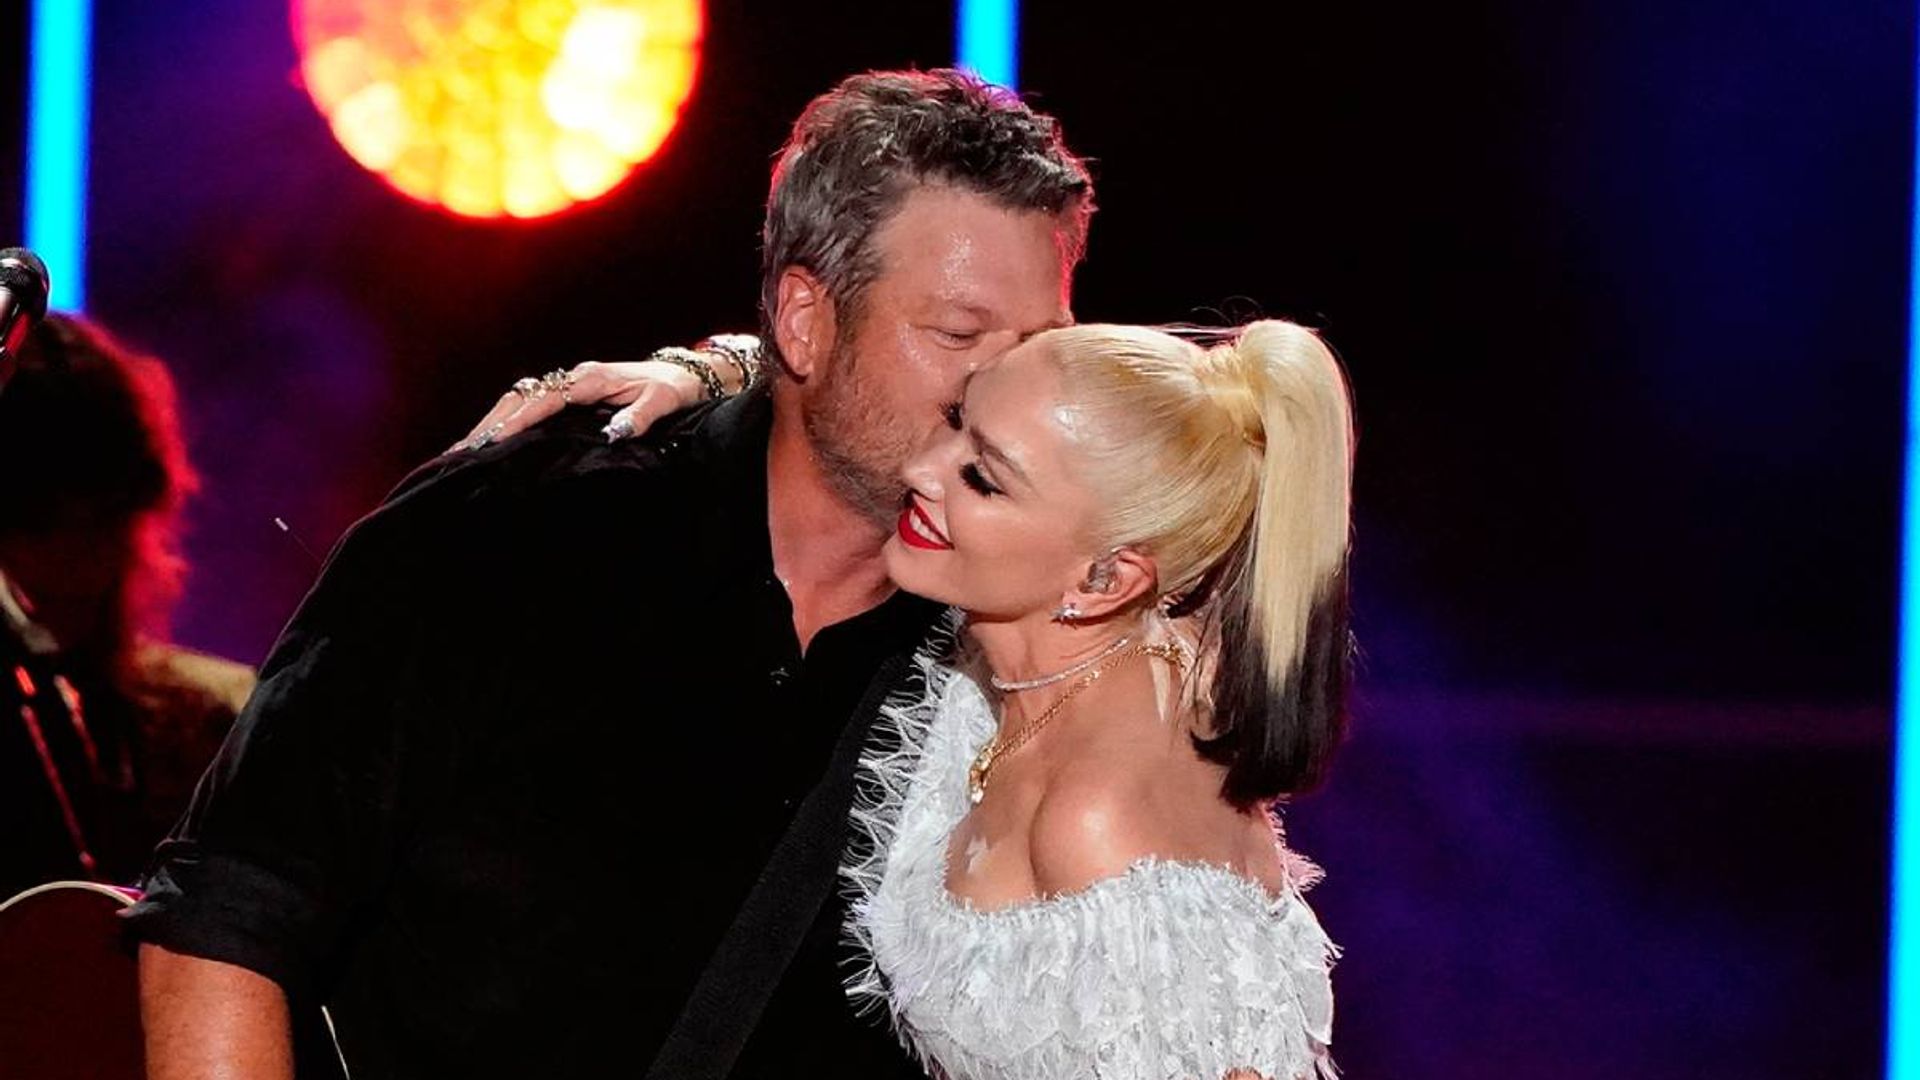 Blake Shelton and Gwen Stefani cause a frenzy with latest exchange during special celebration